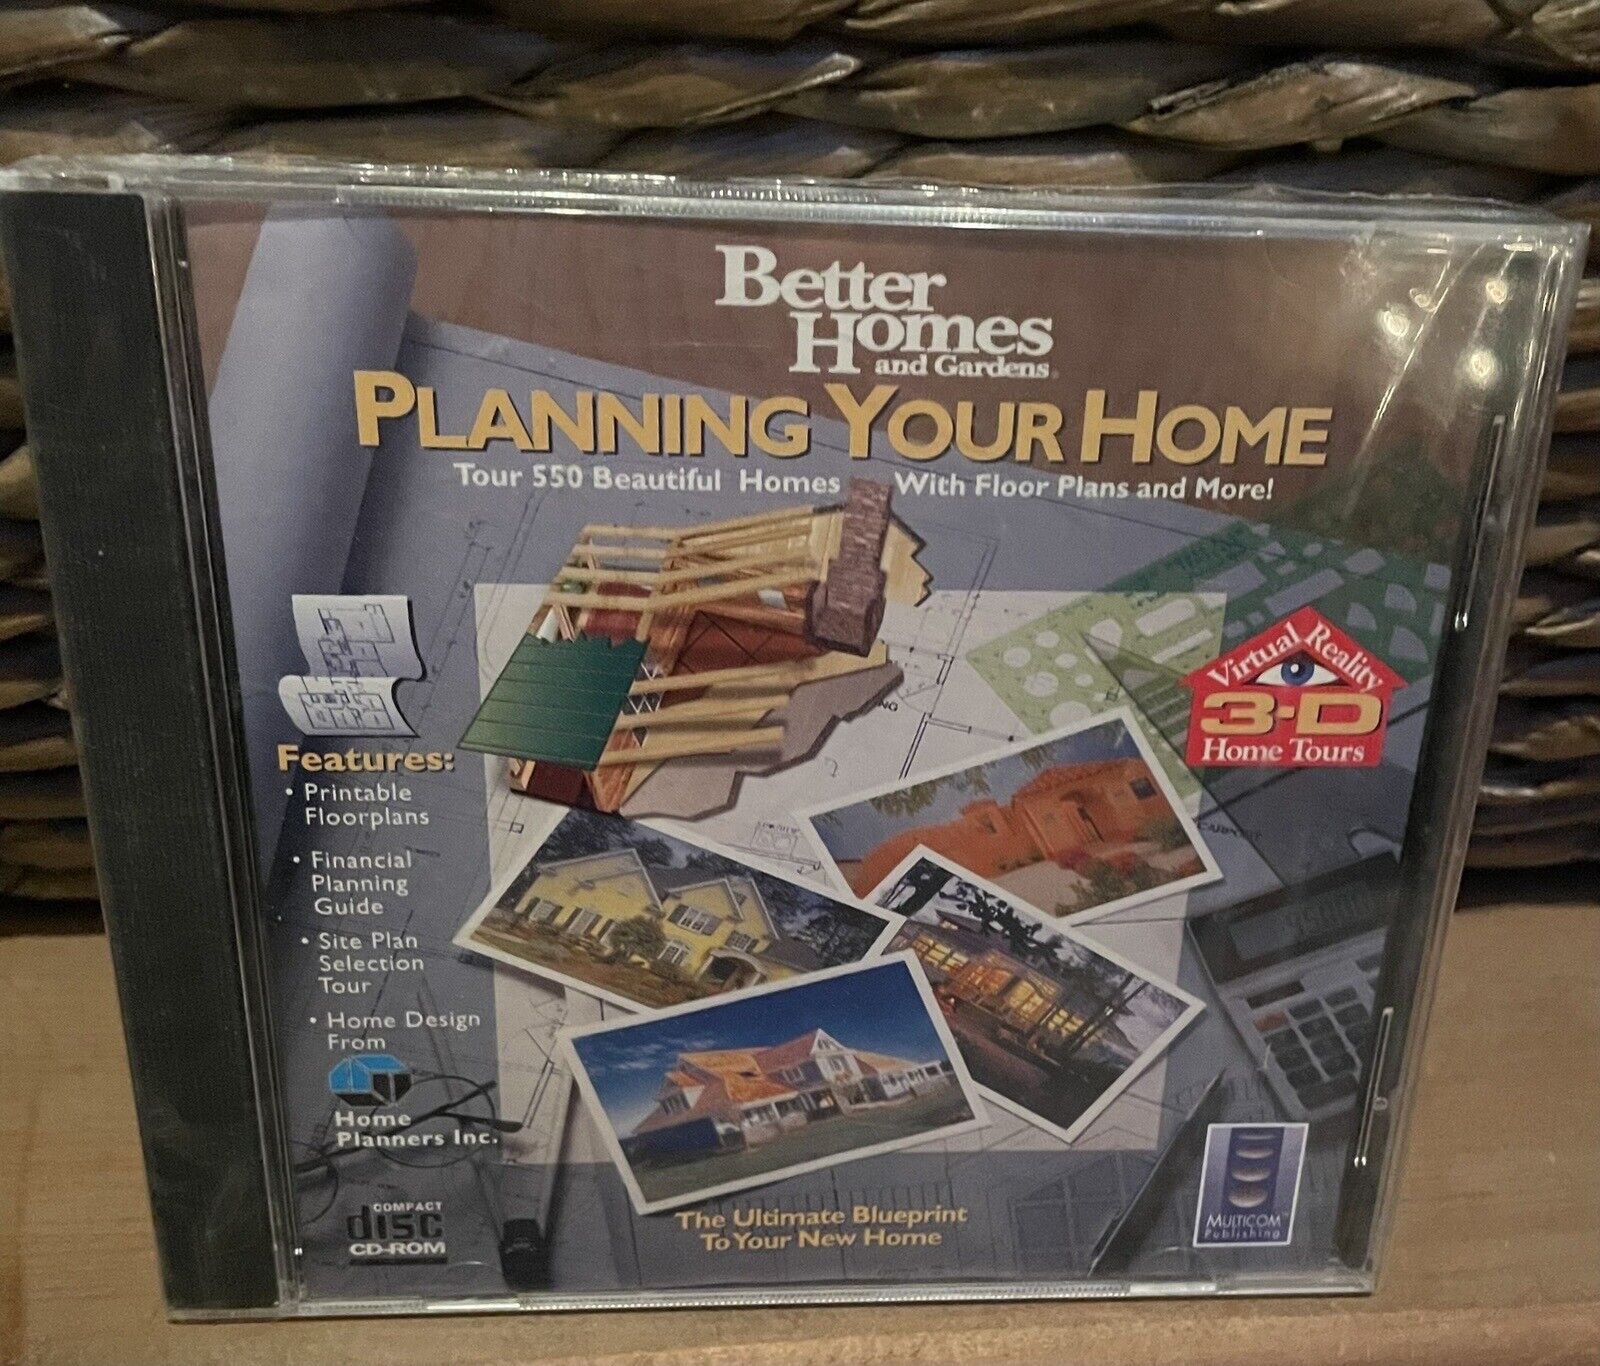 Better Homes and Gardens - Planning Your Home CD-ROM 1995 - 1997 NEW SEALED (J17